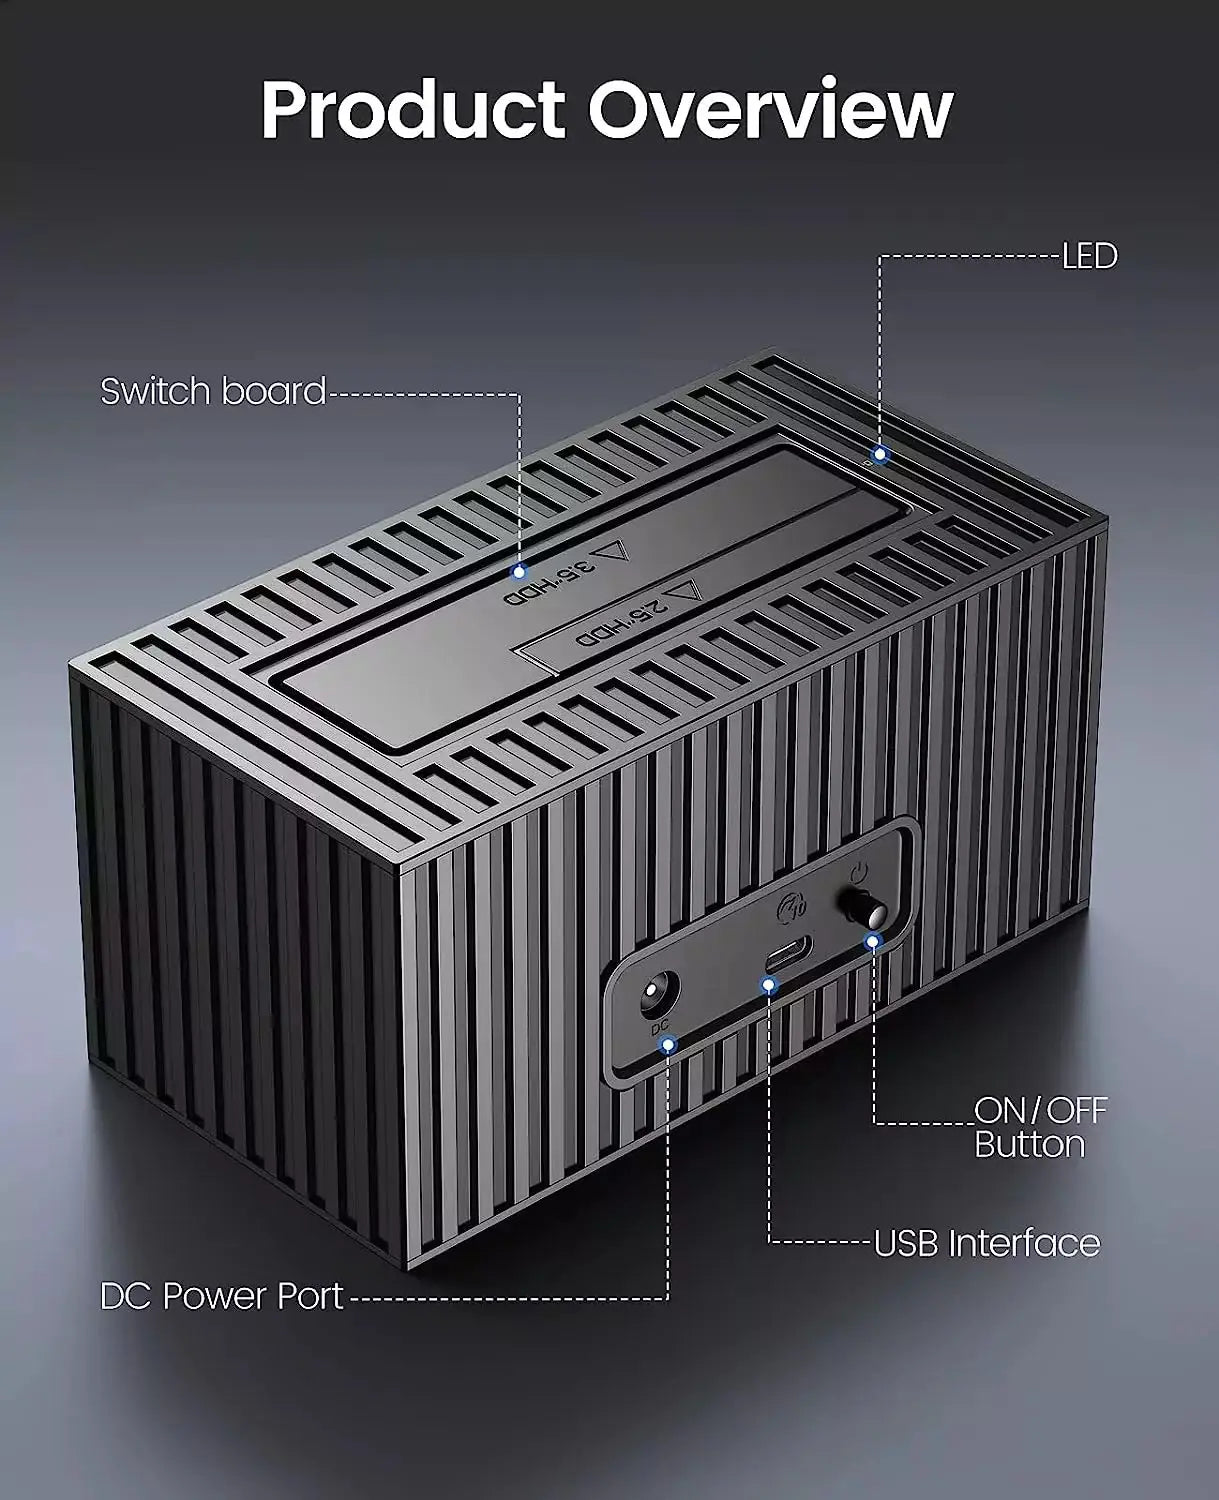 ORICO Container Style 2.5"/3.5" One Bay Hard Drive Docking Station Orico